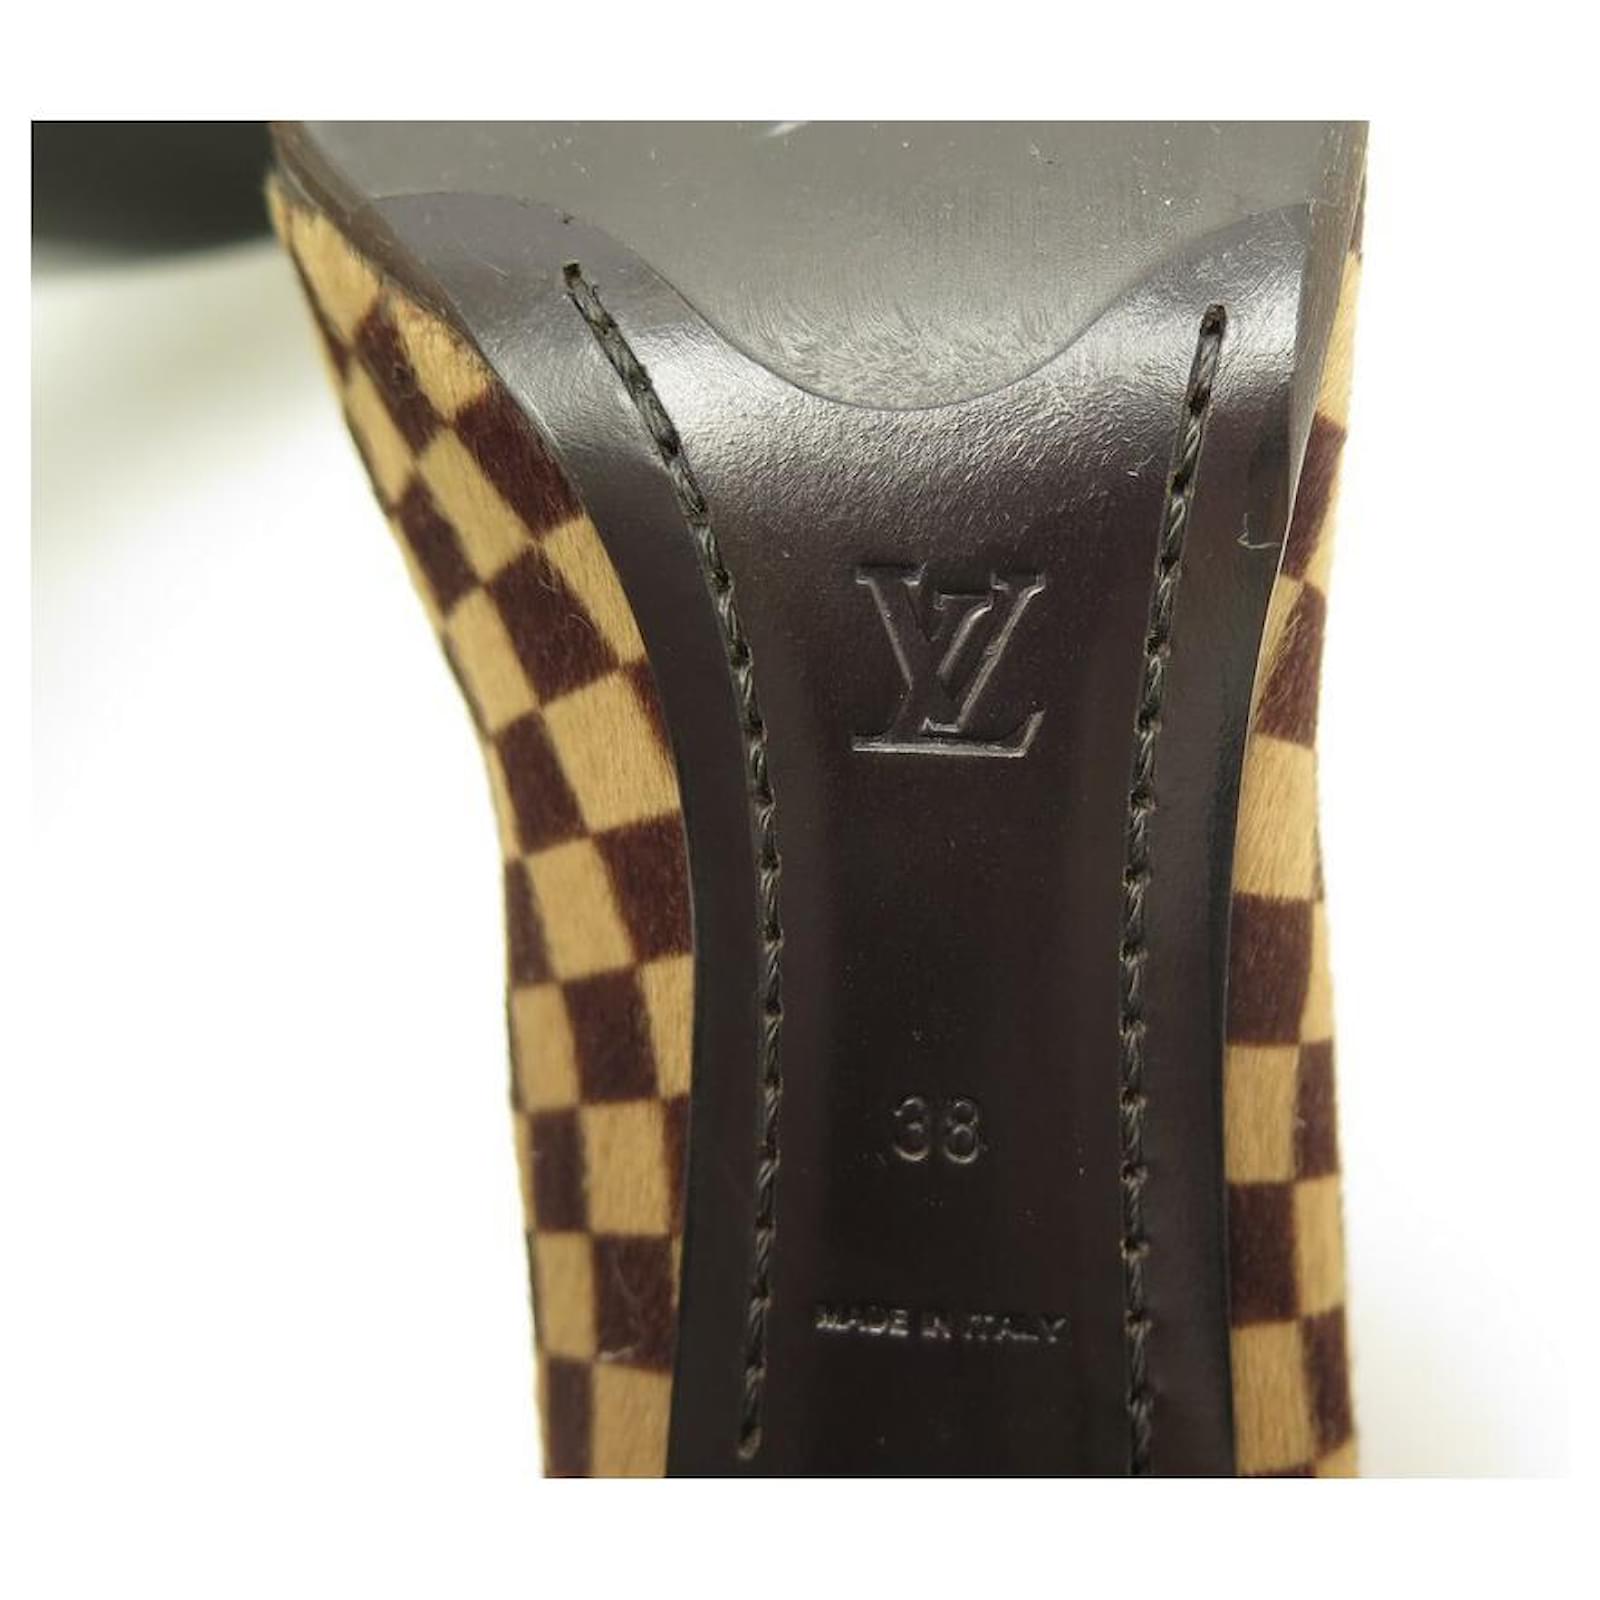 NEW LOUIS VUITTON SHOES DAMIER PUMPS 38 IN BROWN PONY SHOES Pony